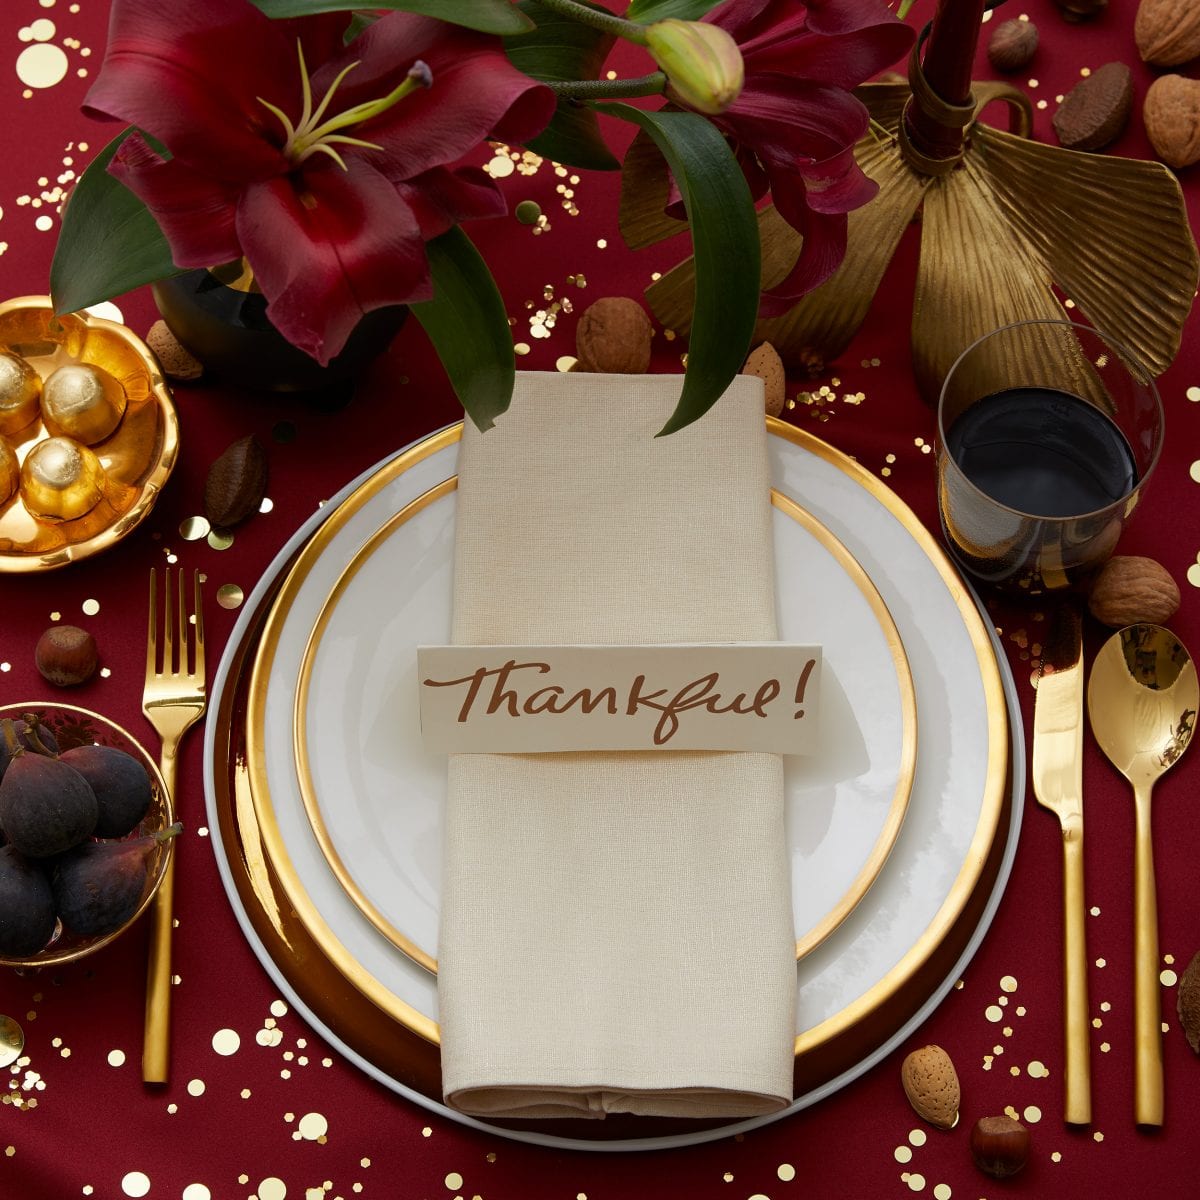 thanksgiving, Place setting, table setting, thankful, place card, easy, Printable, Template